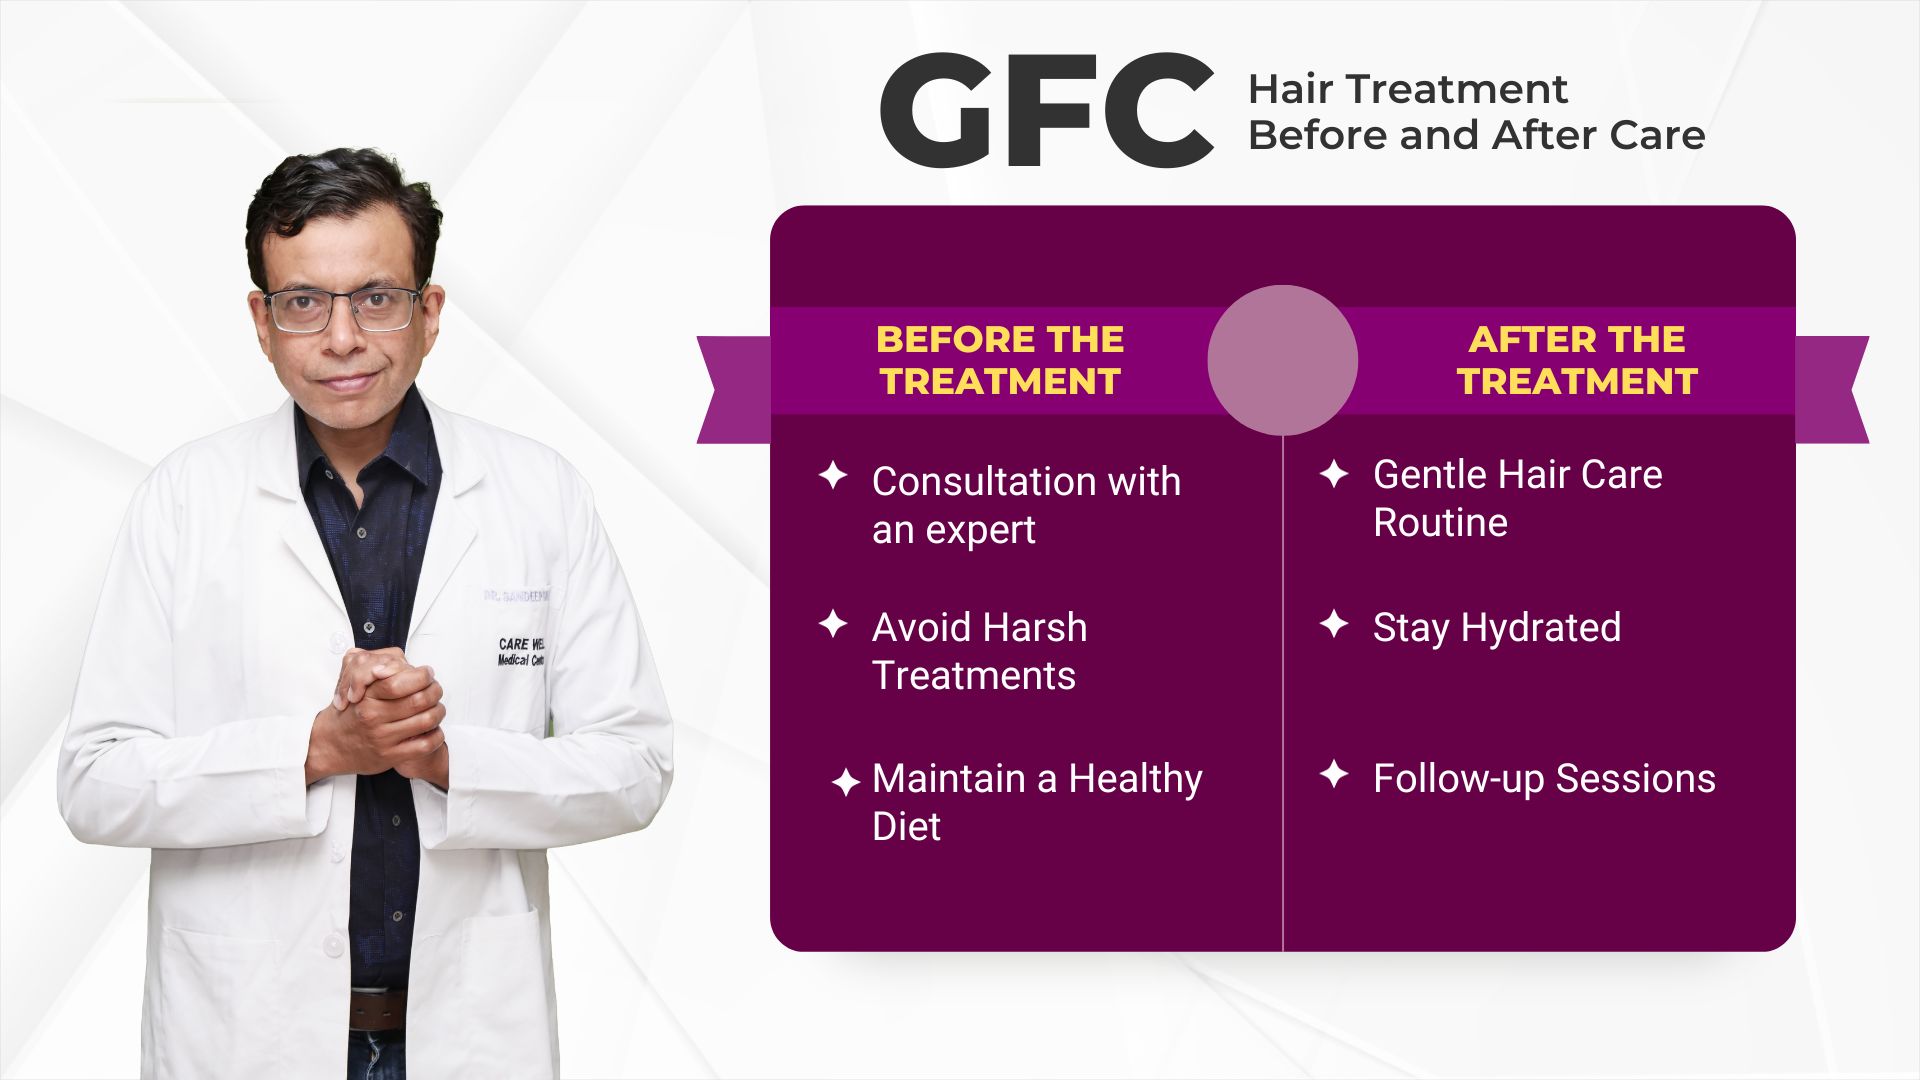 gfc hair treatment before and after care